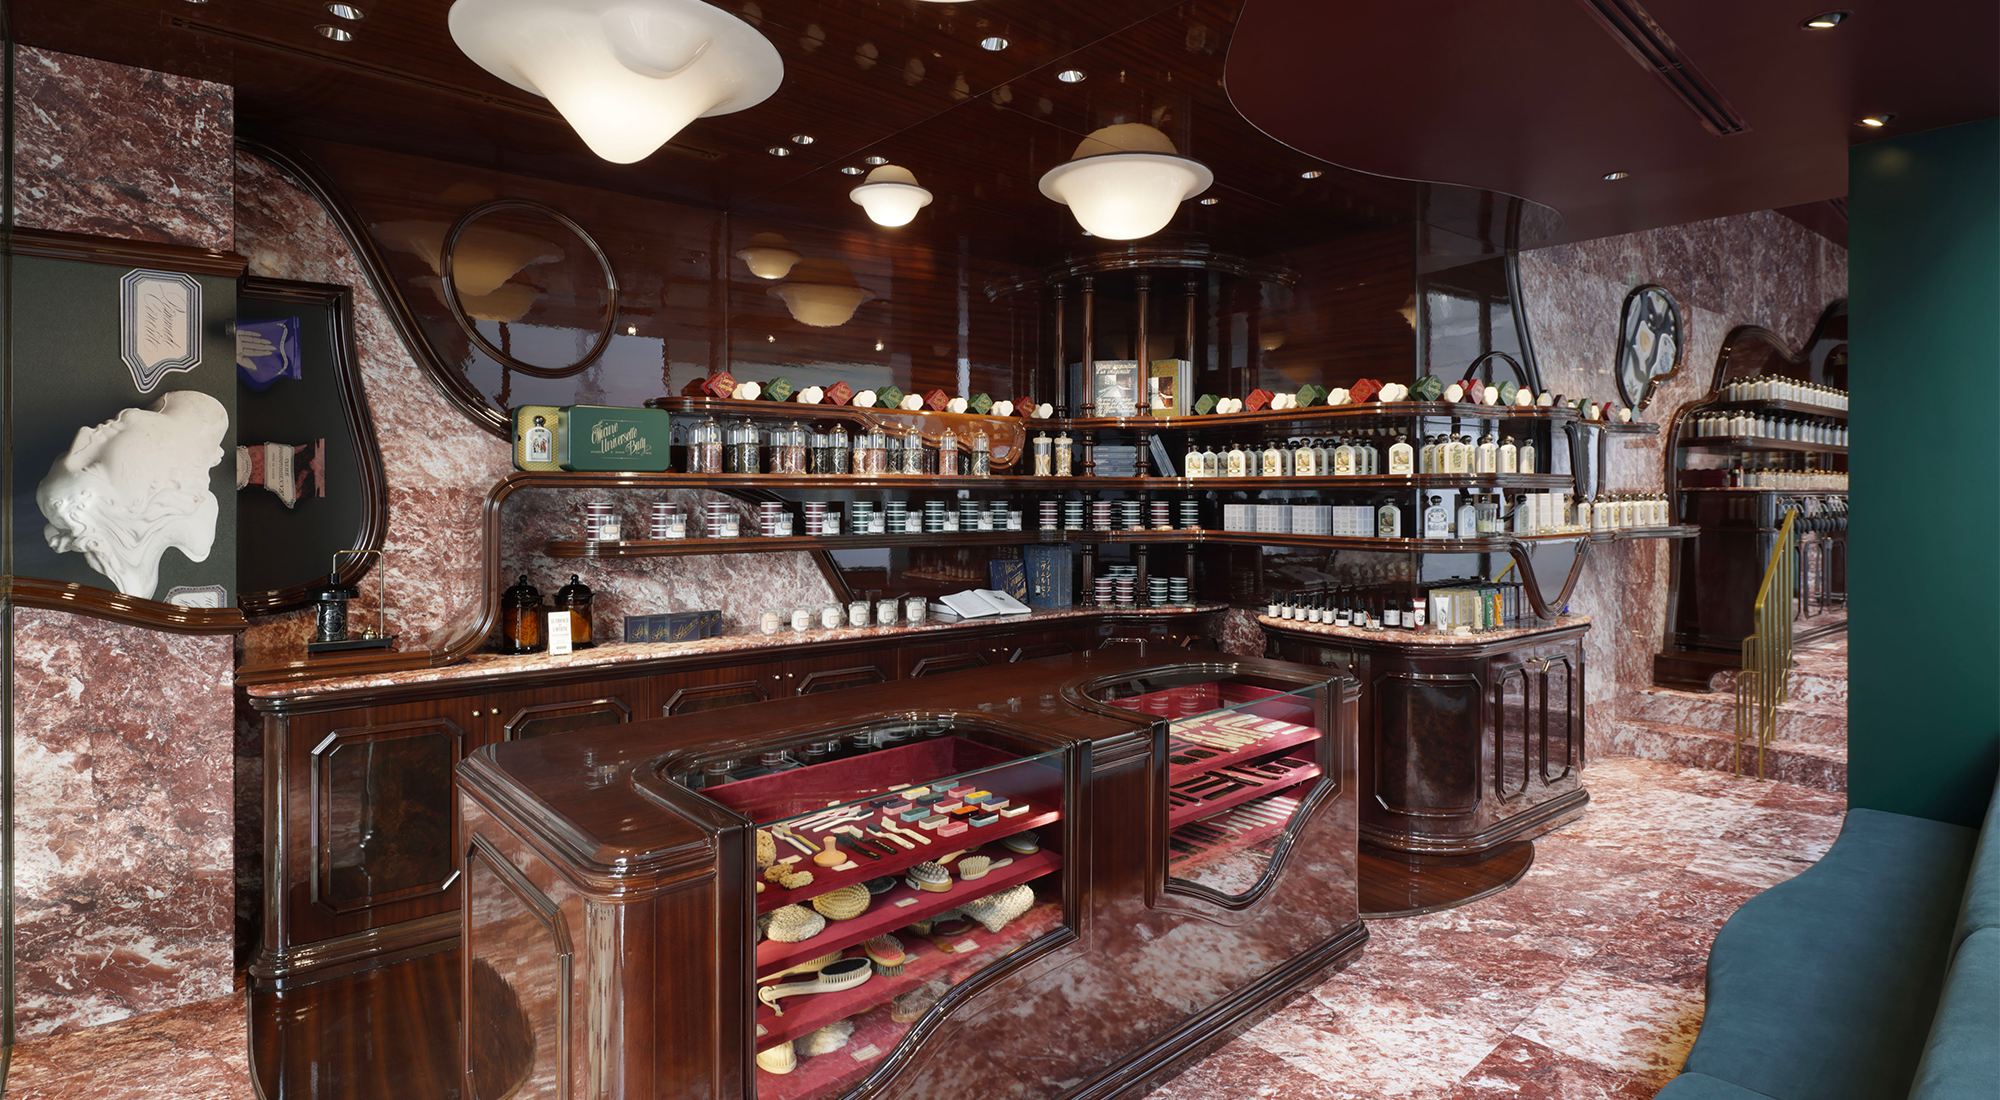 Heritage beauty brand Buly opens Hong Kong store